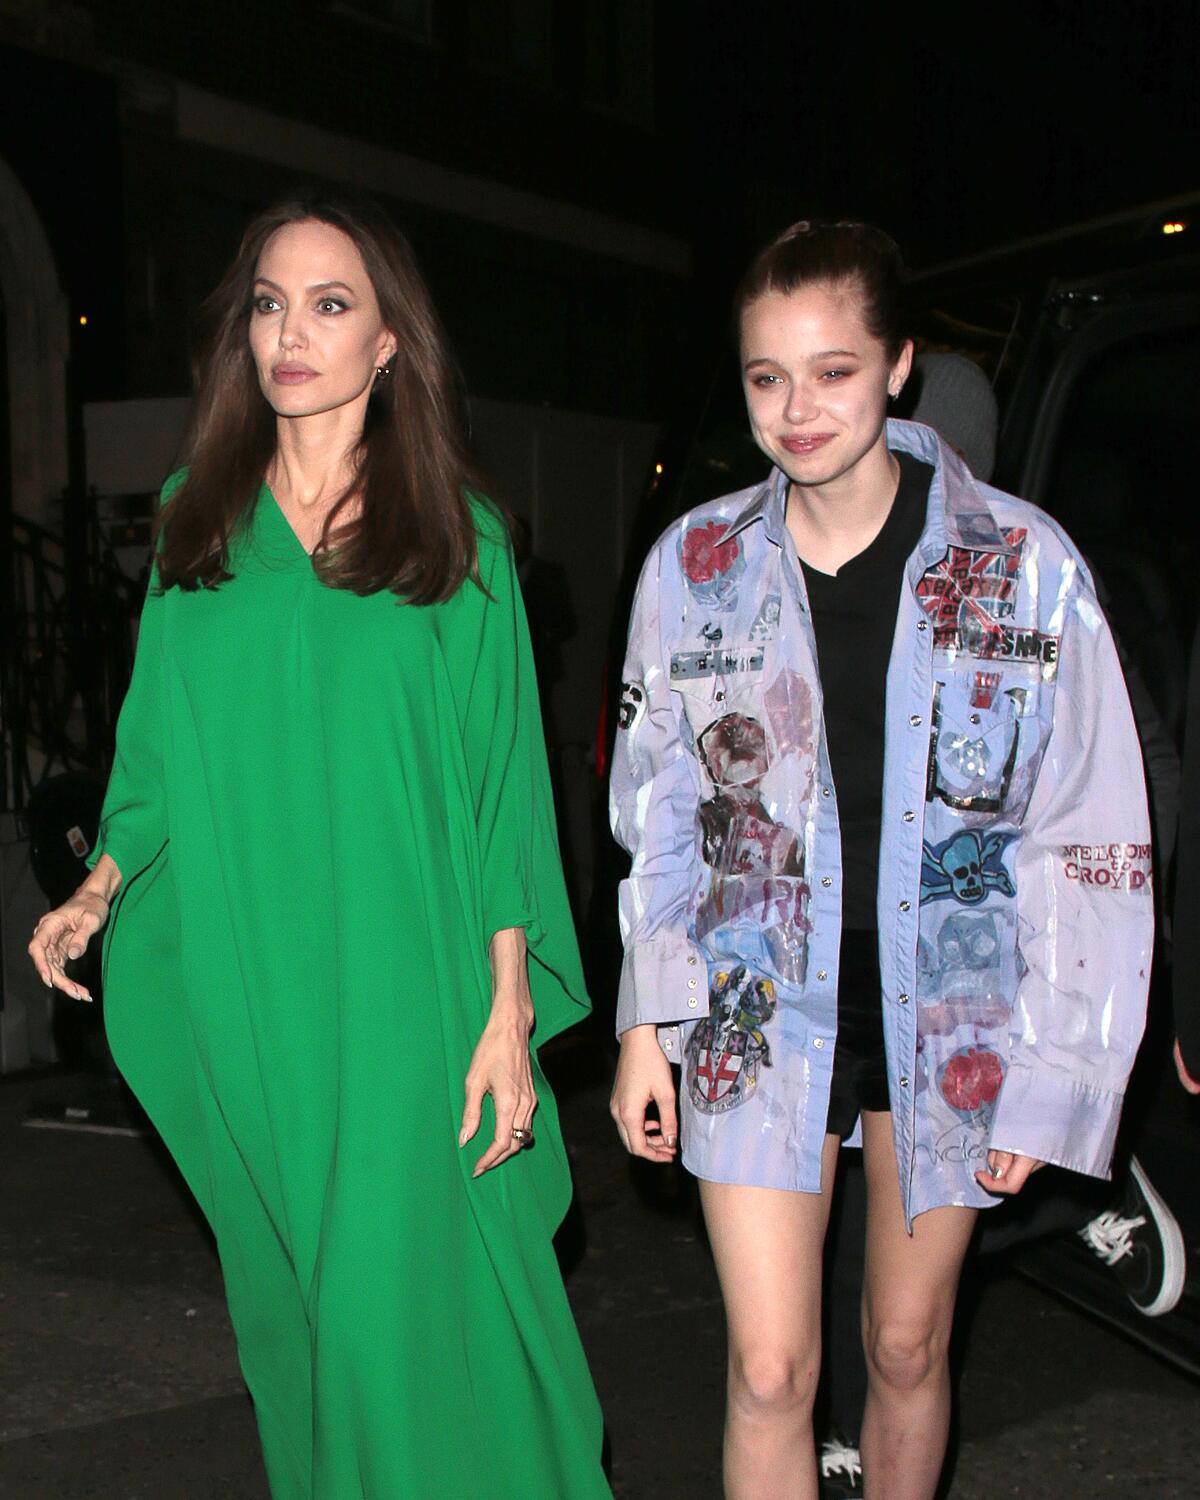 Angelina Jolie walks in a long green gown at night next to daughter Shiloh, who hears a patchwork overshirt